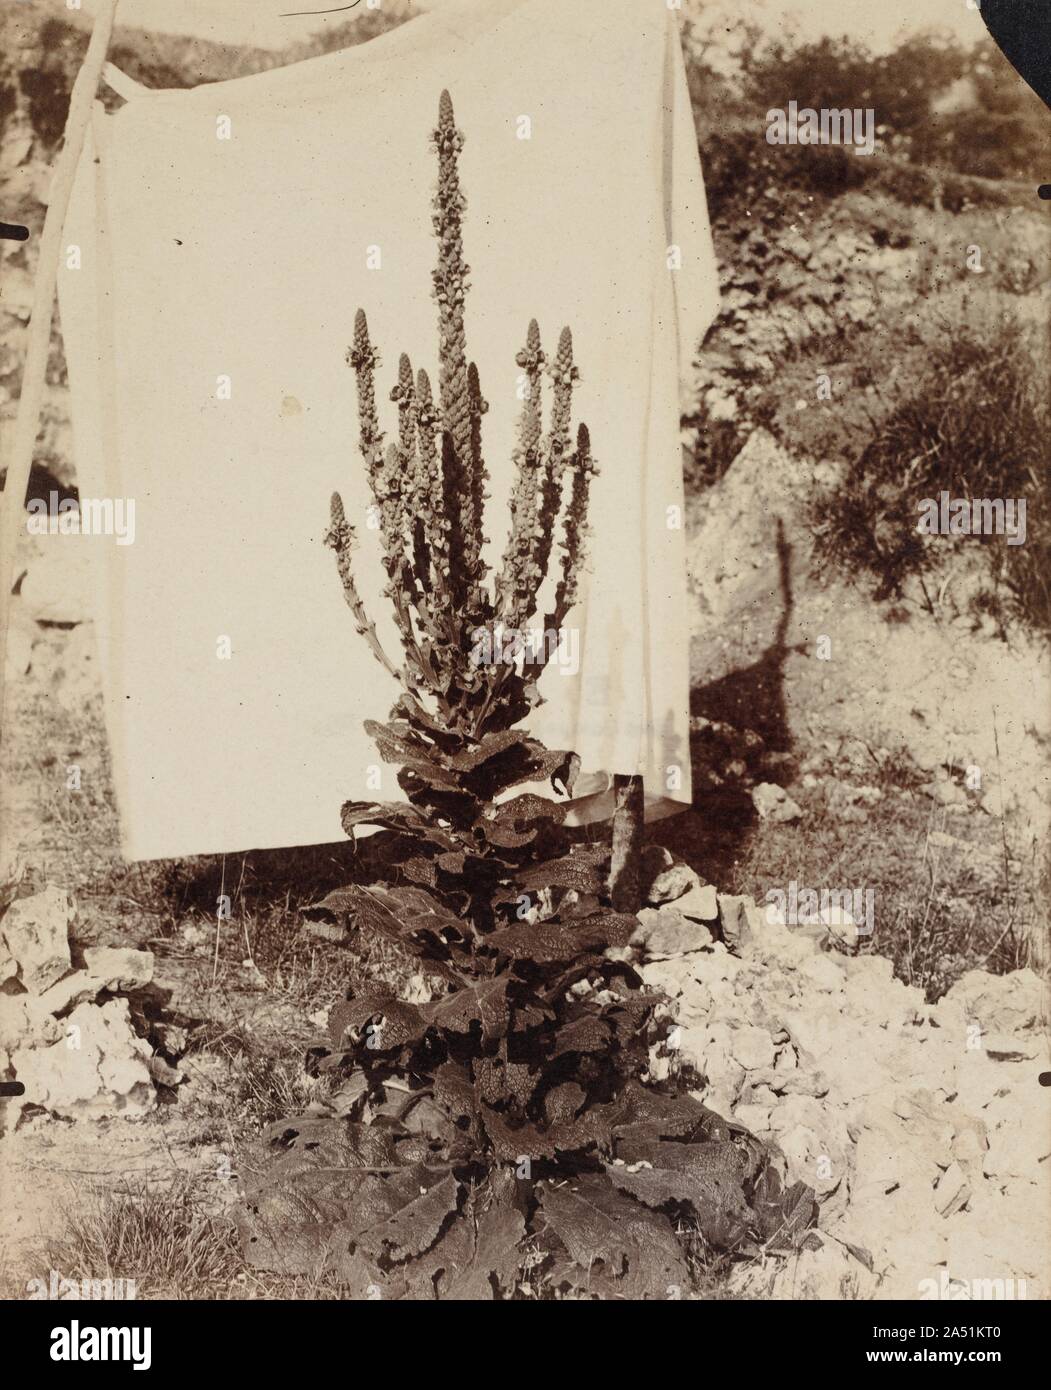 Mullein in Bloom, c. 1897-1899. Atget produced architectural details, views of historic Paris, landscapes, and botanical images for use by painters and illustrators. Despite being a product of the 19th century, he was greatly admired by the avant-garde photographers of the 1920s. Modernists esteemed the straightforwardness of his photographs, while the Surrealists found inspiration in their evocative power. An artist or illustrator using this image of a common plant used in herbal remedies would have ignored the landscape background. But the Surrealists would have appreciated the unexpected, u Stock Photo